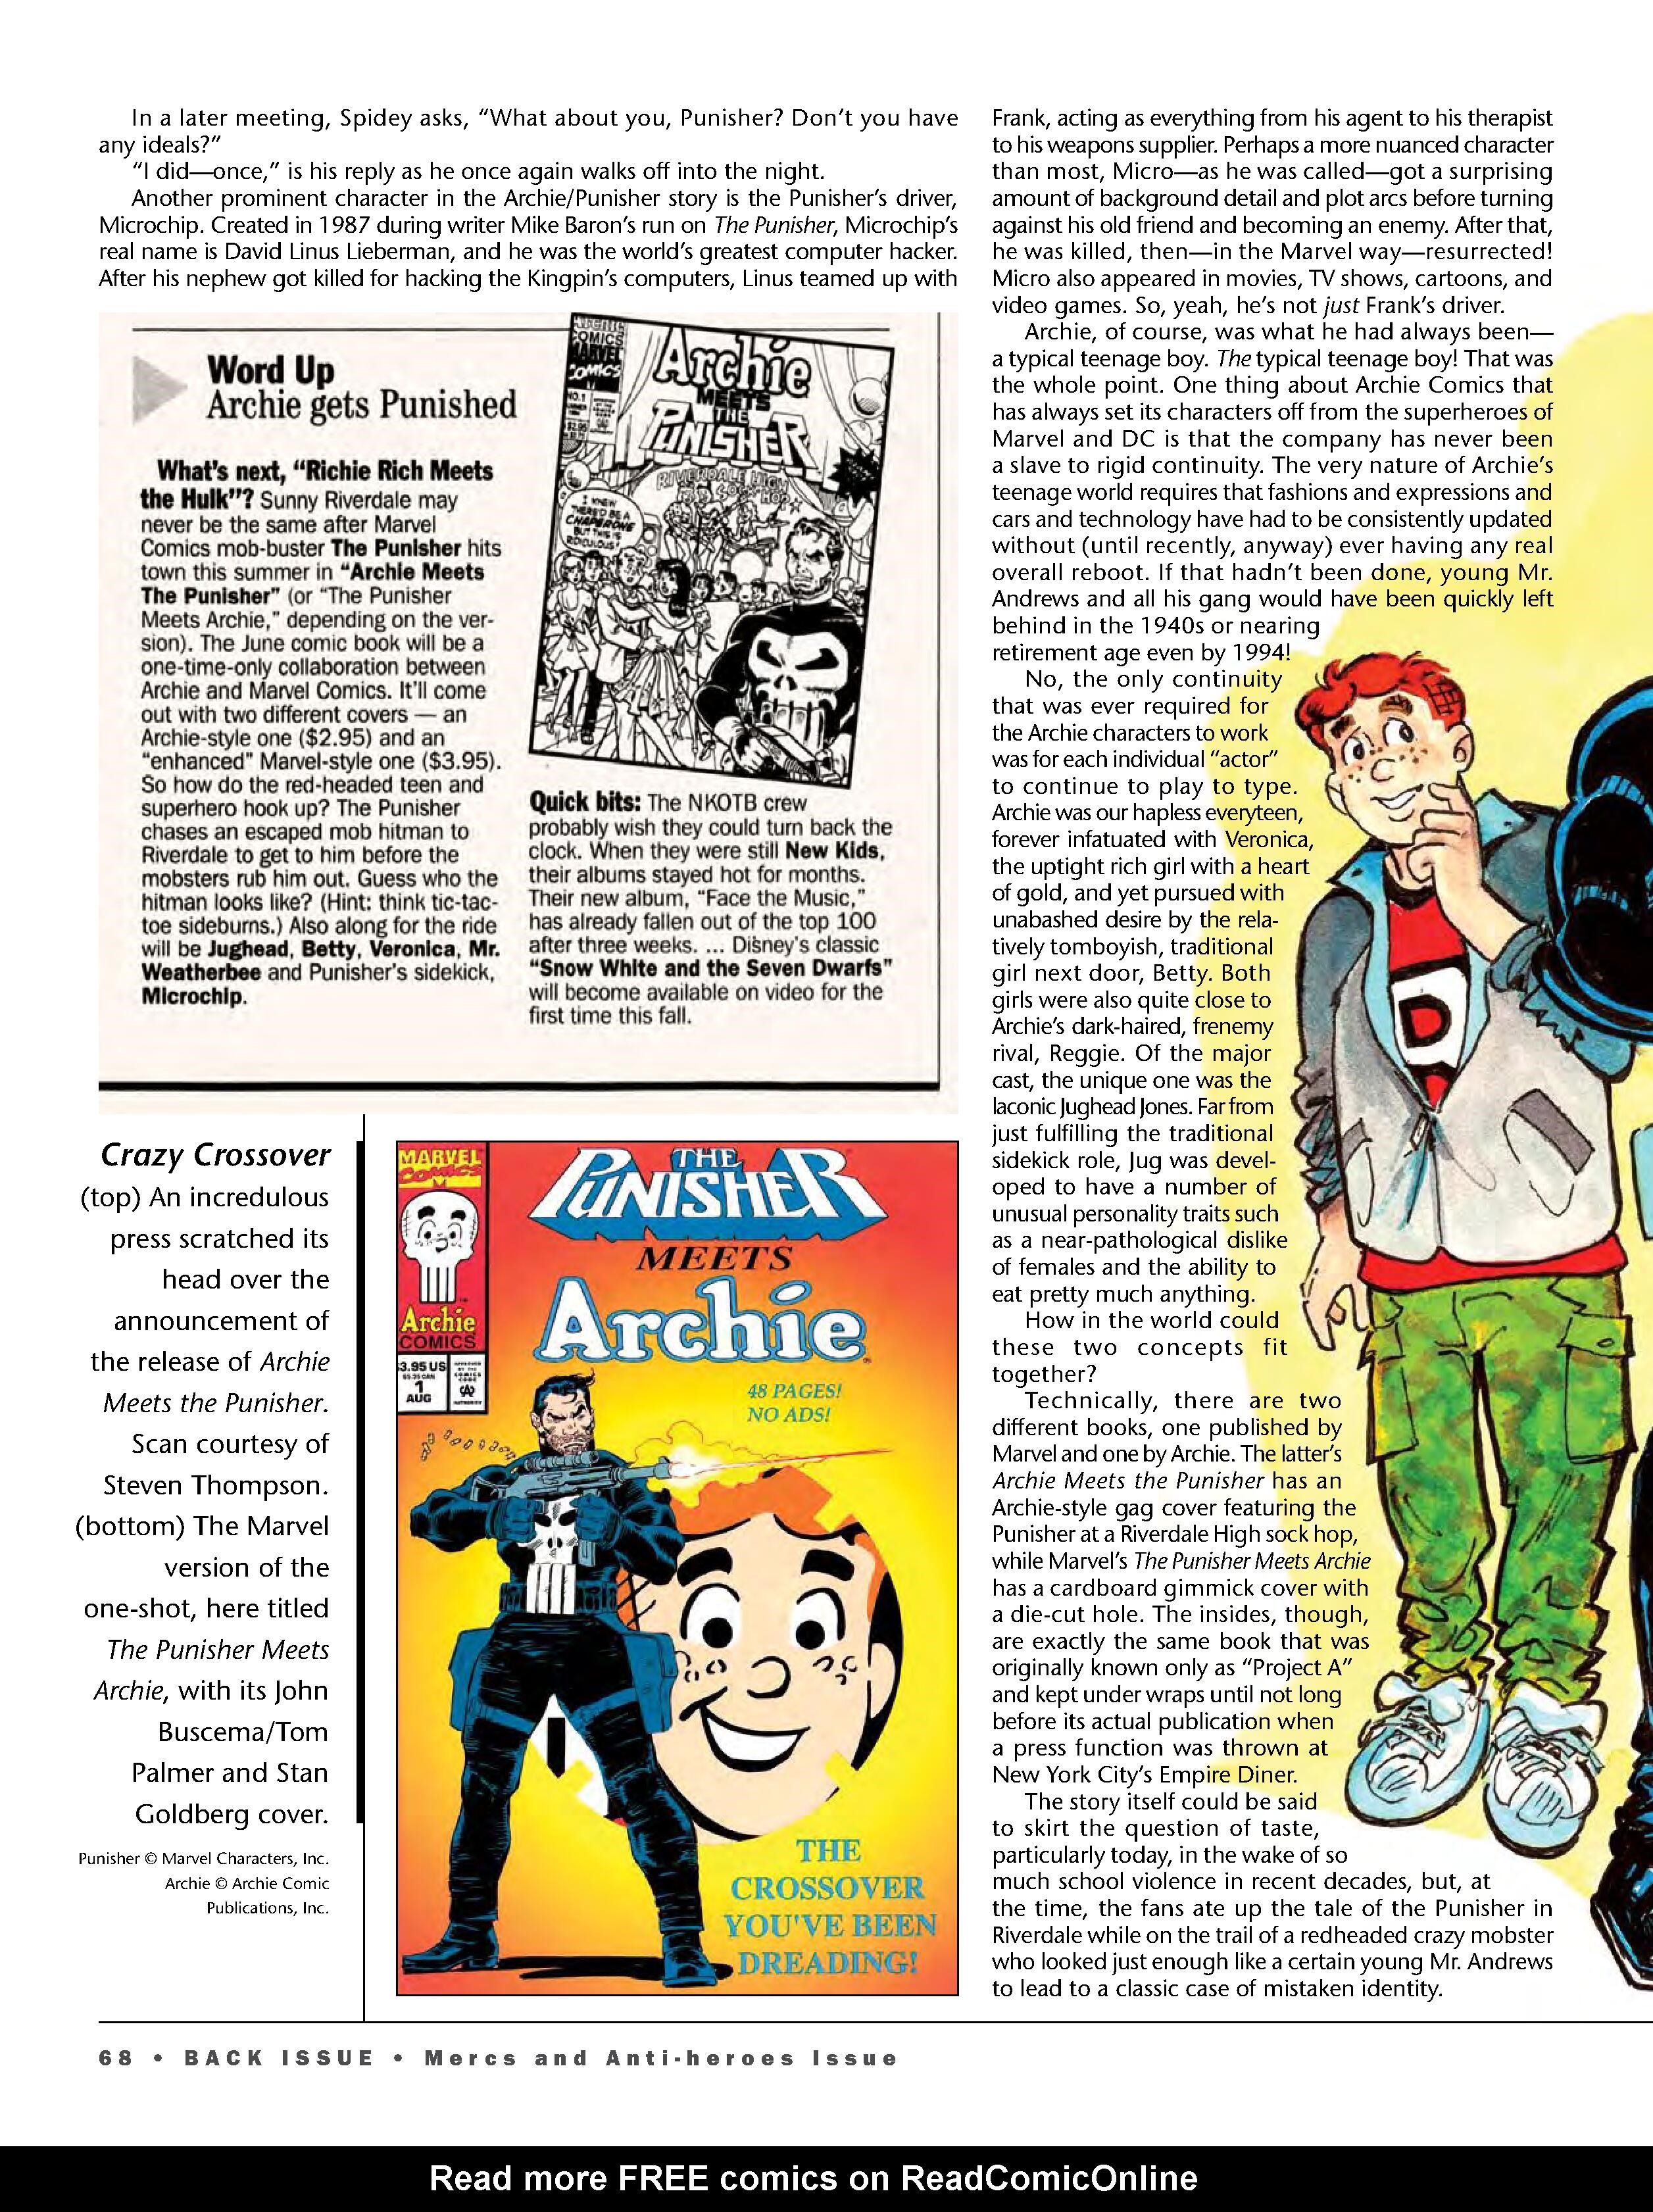 Read online Back Issue comic -  Issue #102 - 70